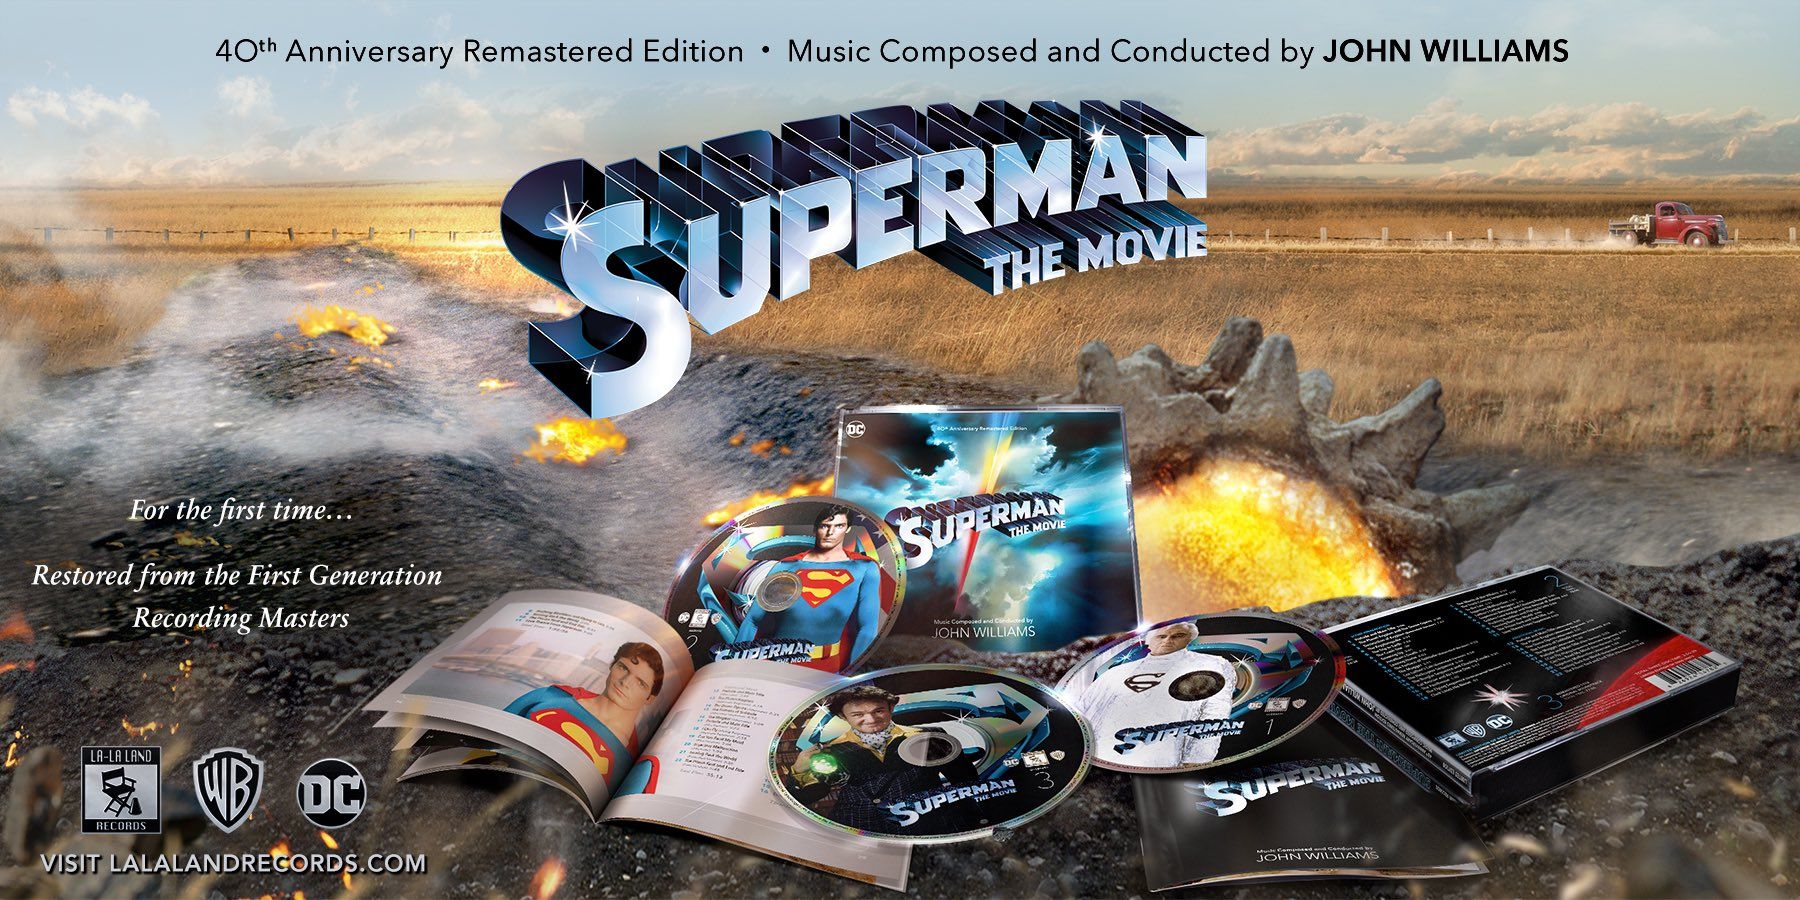 Promotional artwork for the Lalaland release of the Superman the movie soundtrack. 40th Anniversary Remastered Edition • Music Composed and Conducted by JOHN WILLIAMS THE MOVIE For the first time. Restored from the First Generation Recording Masters